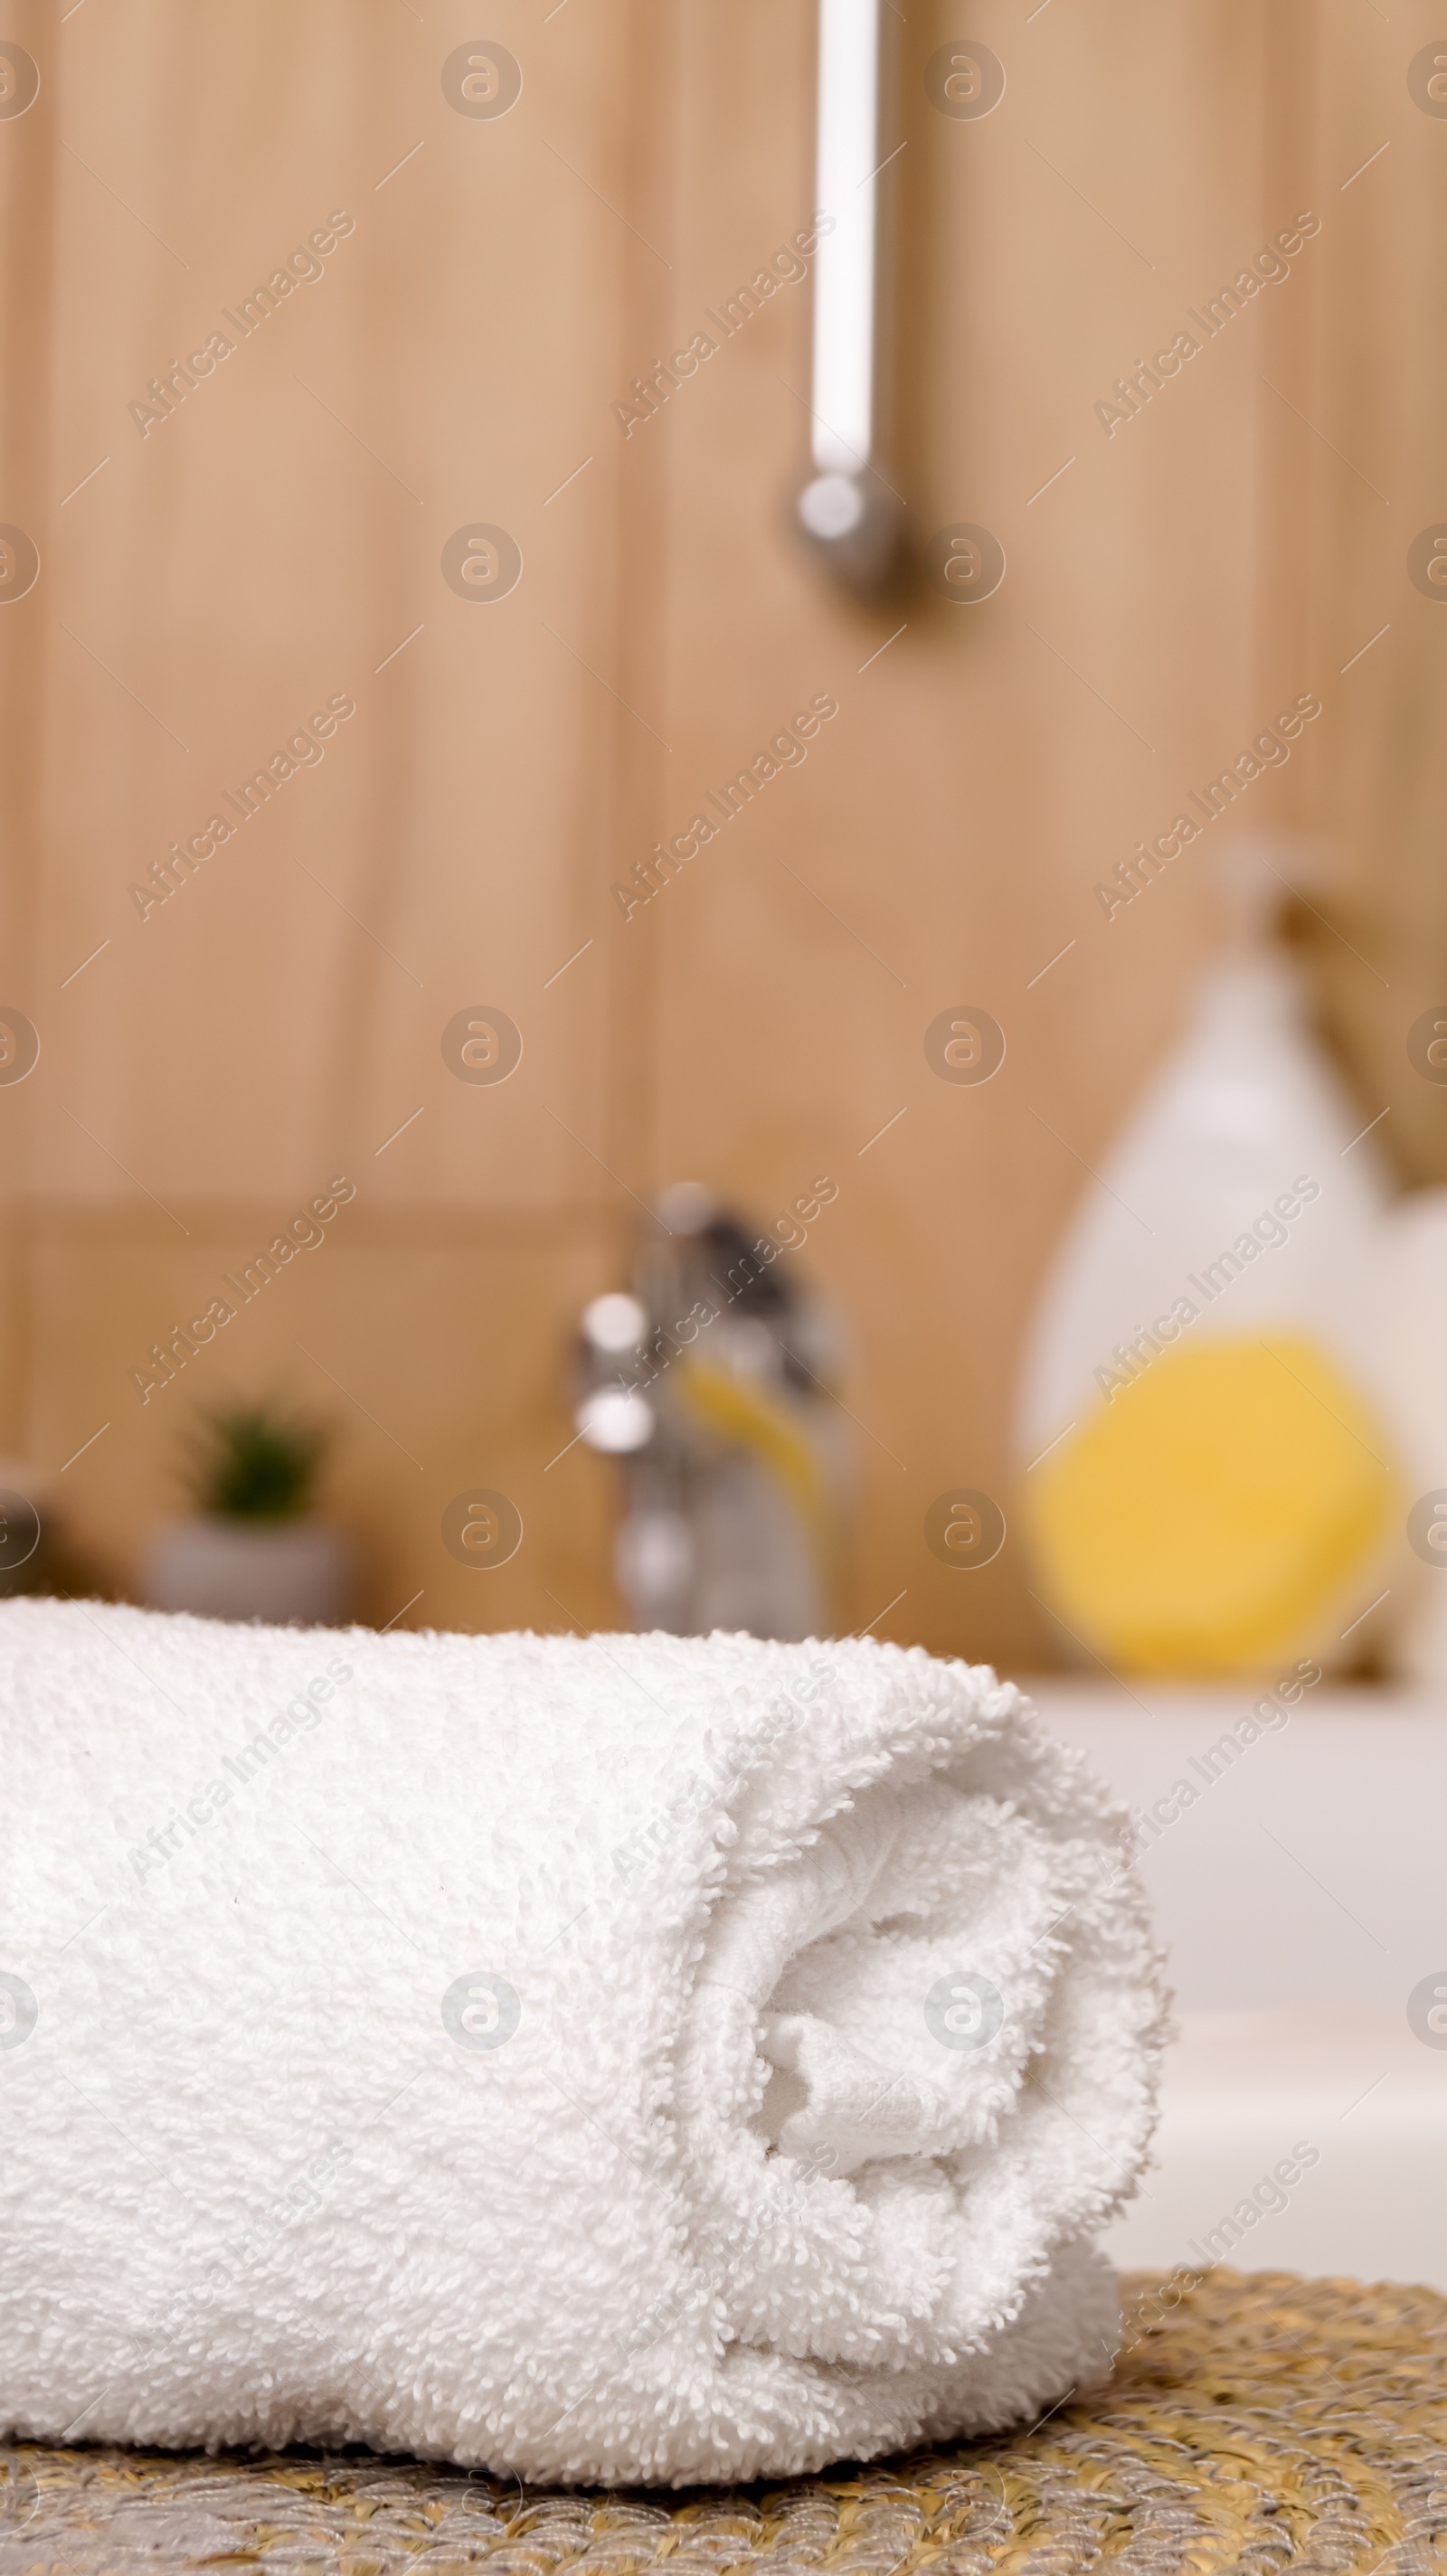 Photo of Rolled bath towel on table in bathroom